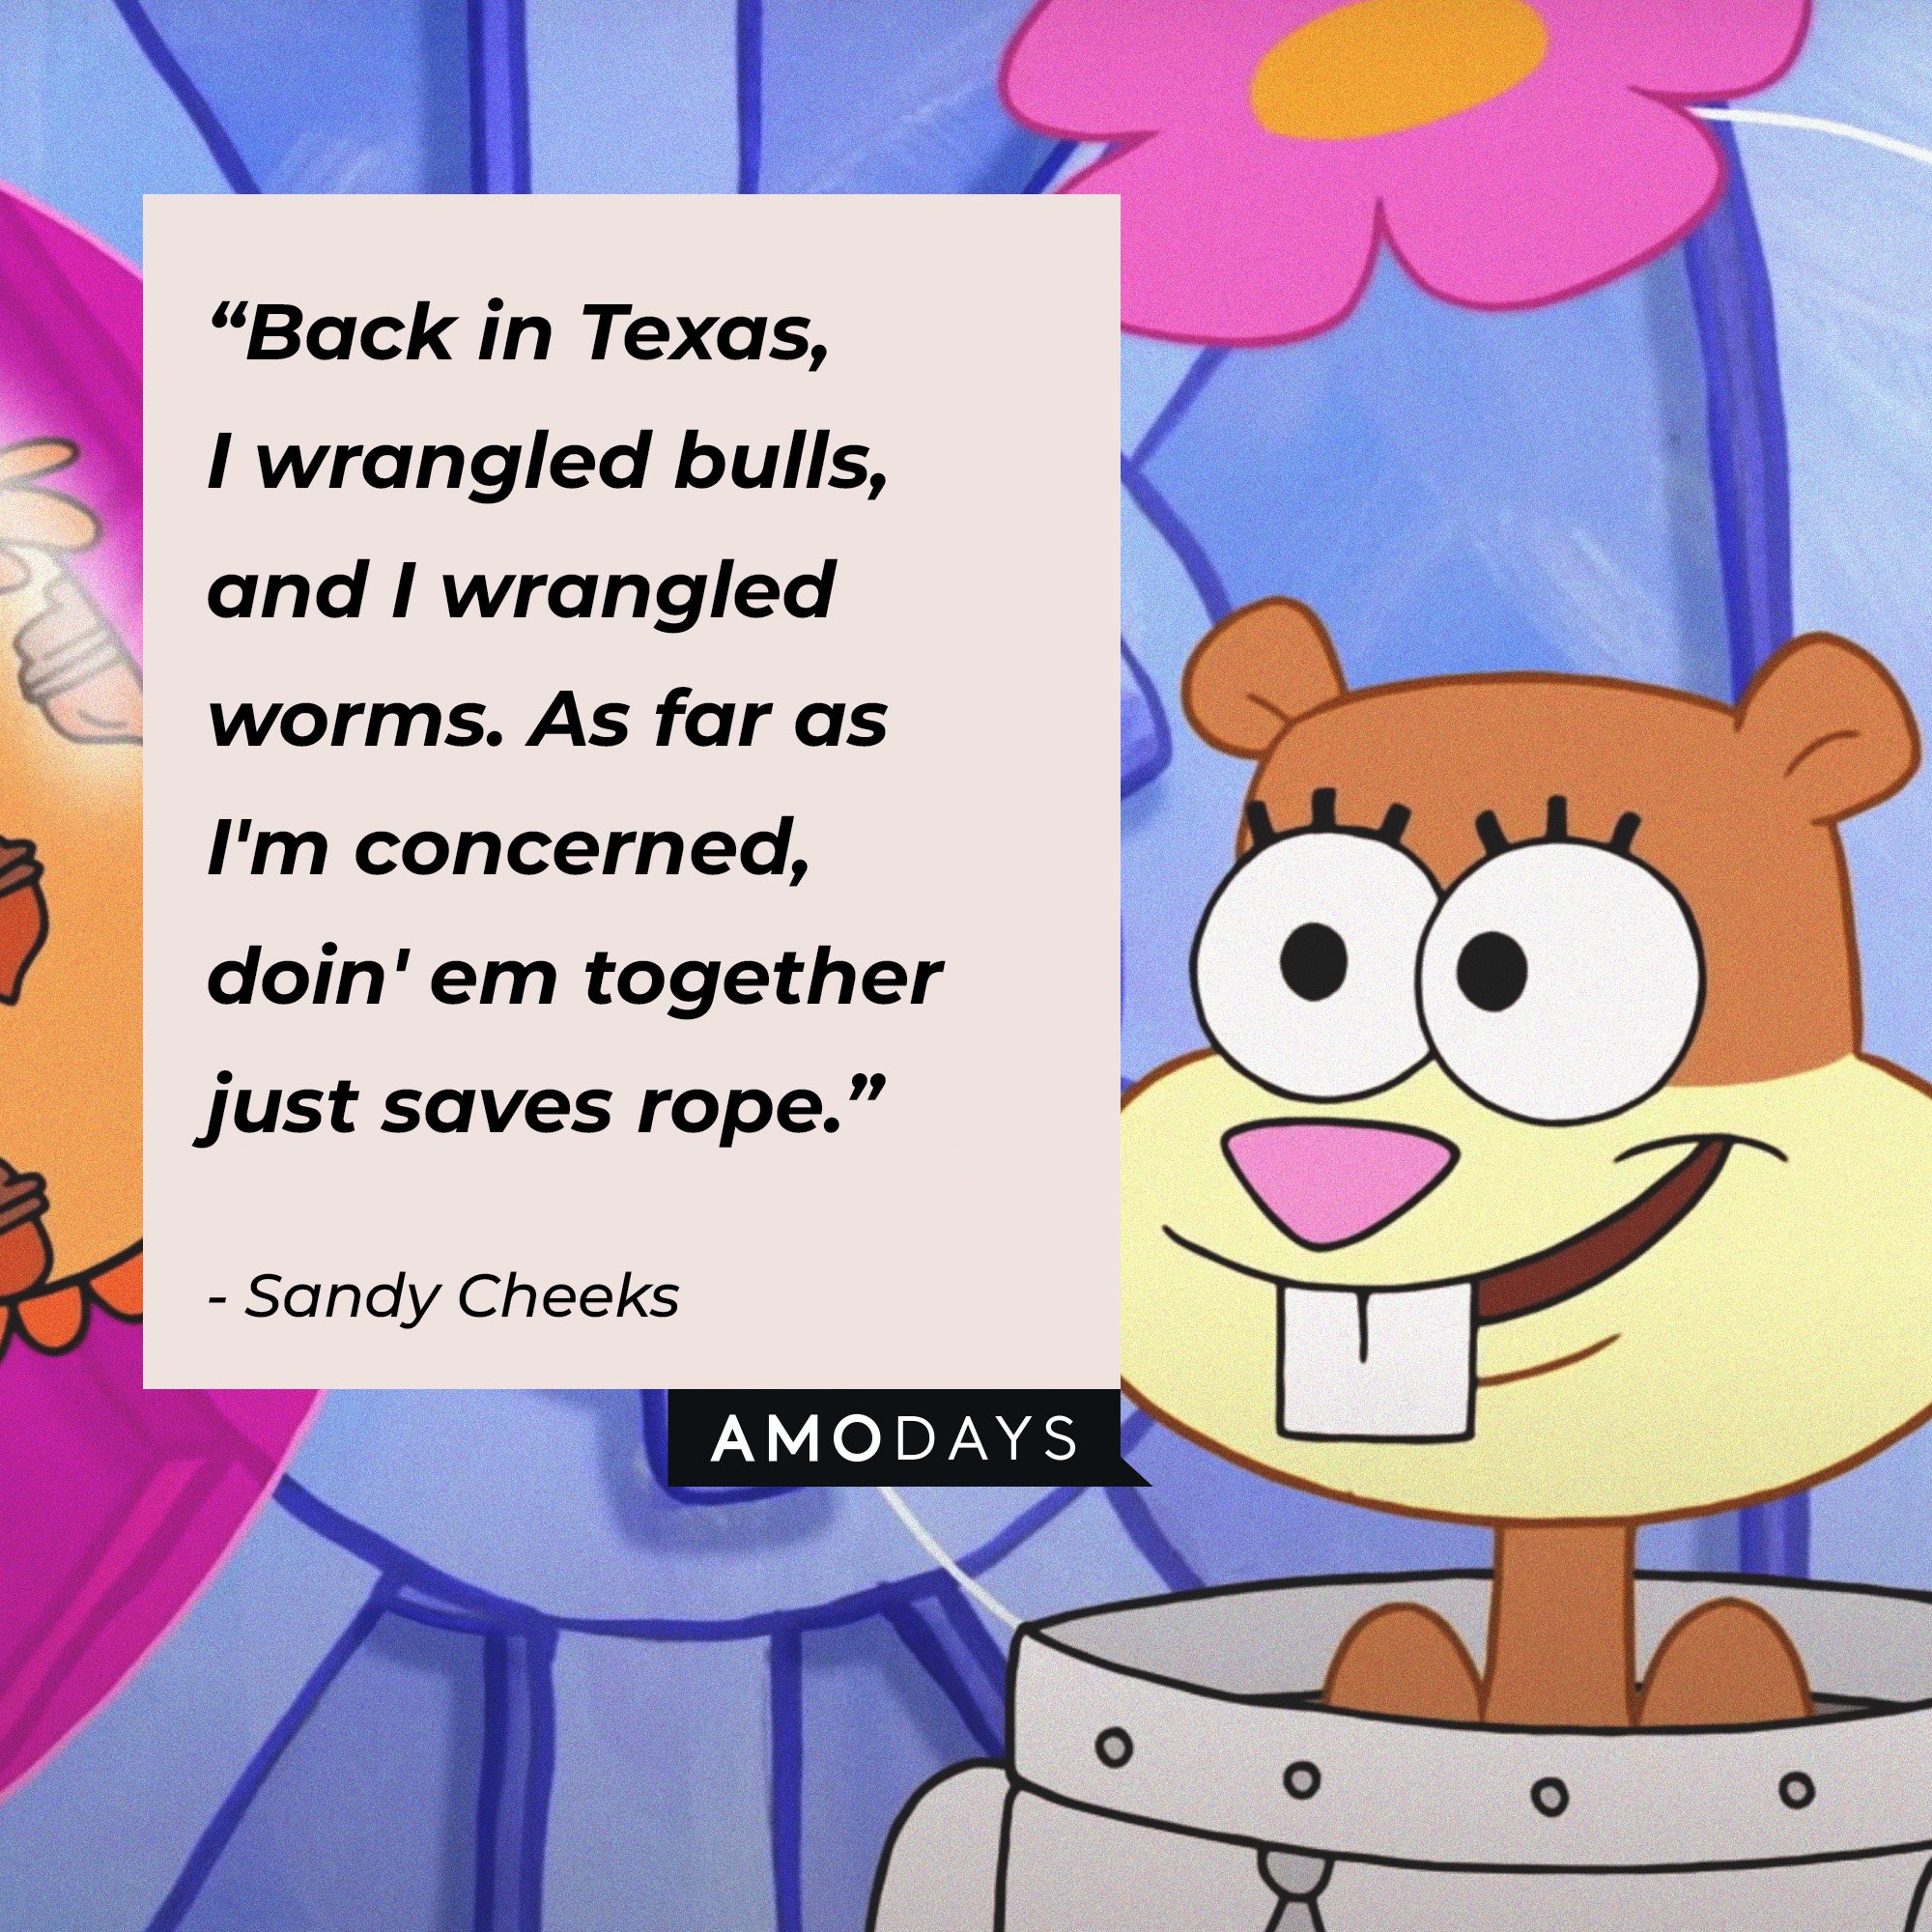  Sandy Cheeks's quote: "Back in Texas, I wrangled bulls, and I wrangled worms. As far as I'm concerned, doin' em together just saves rope.” | Image: AmoDays 